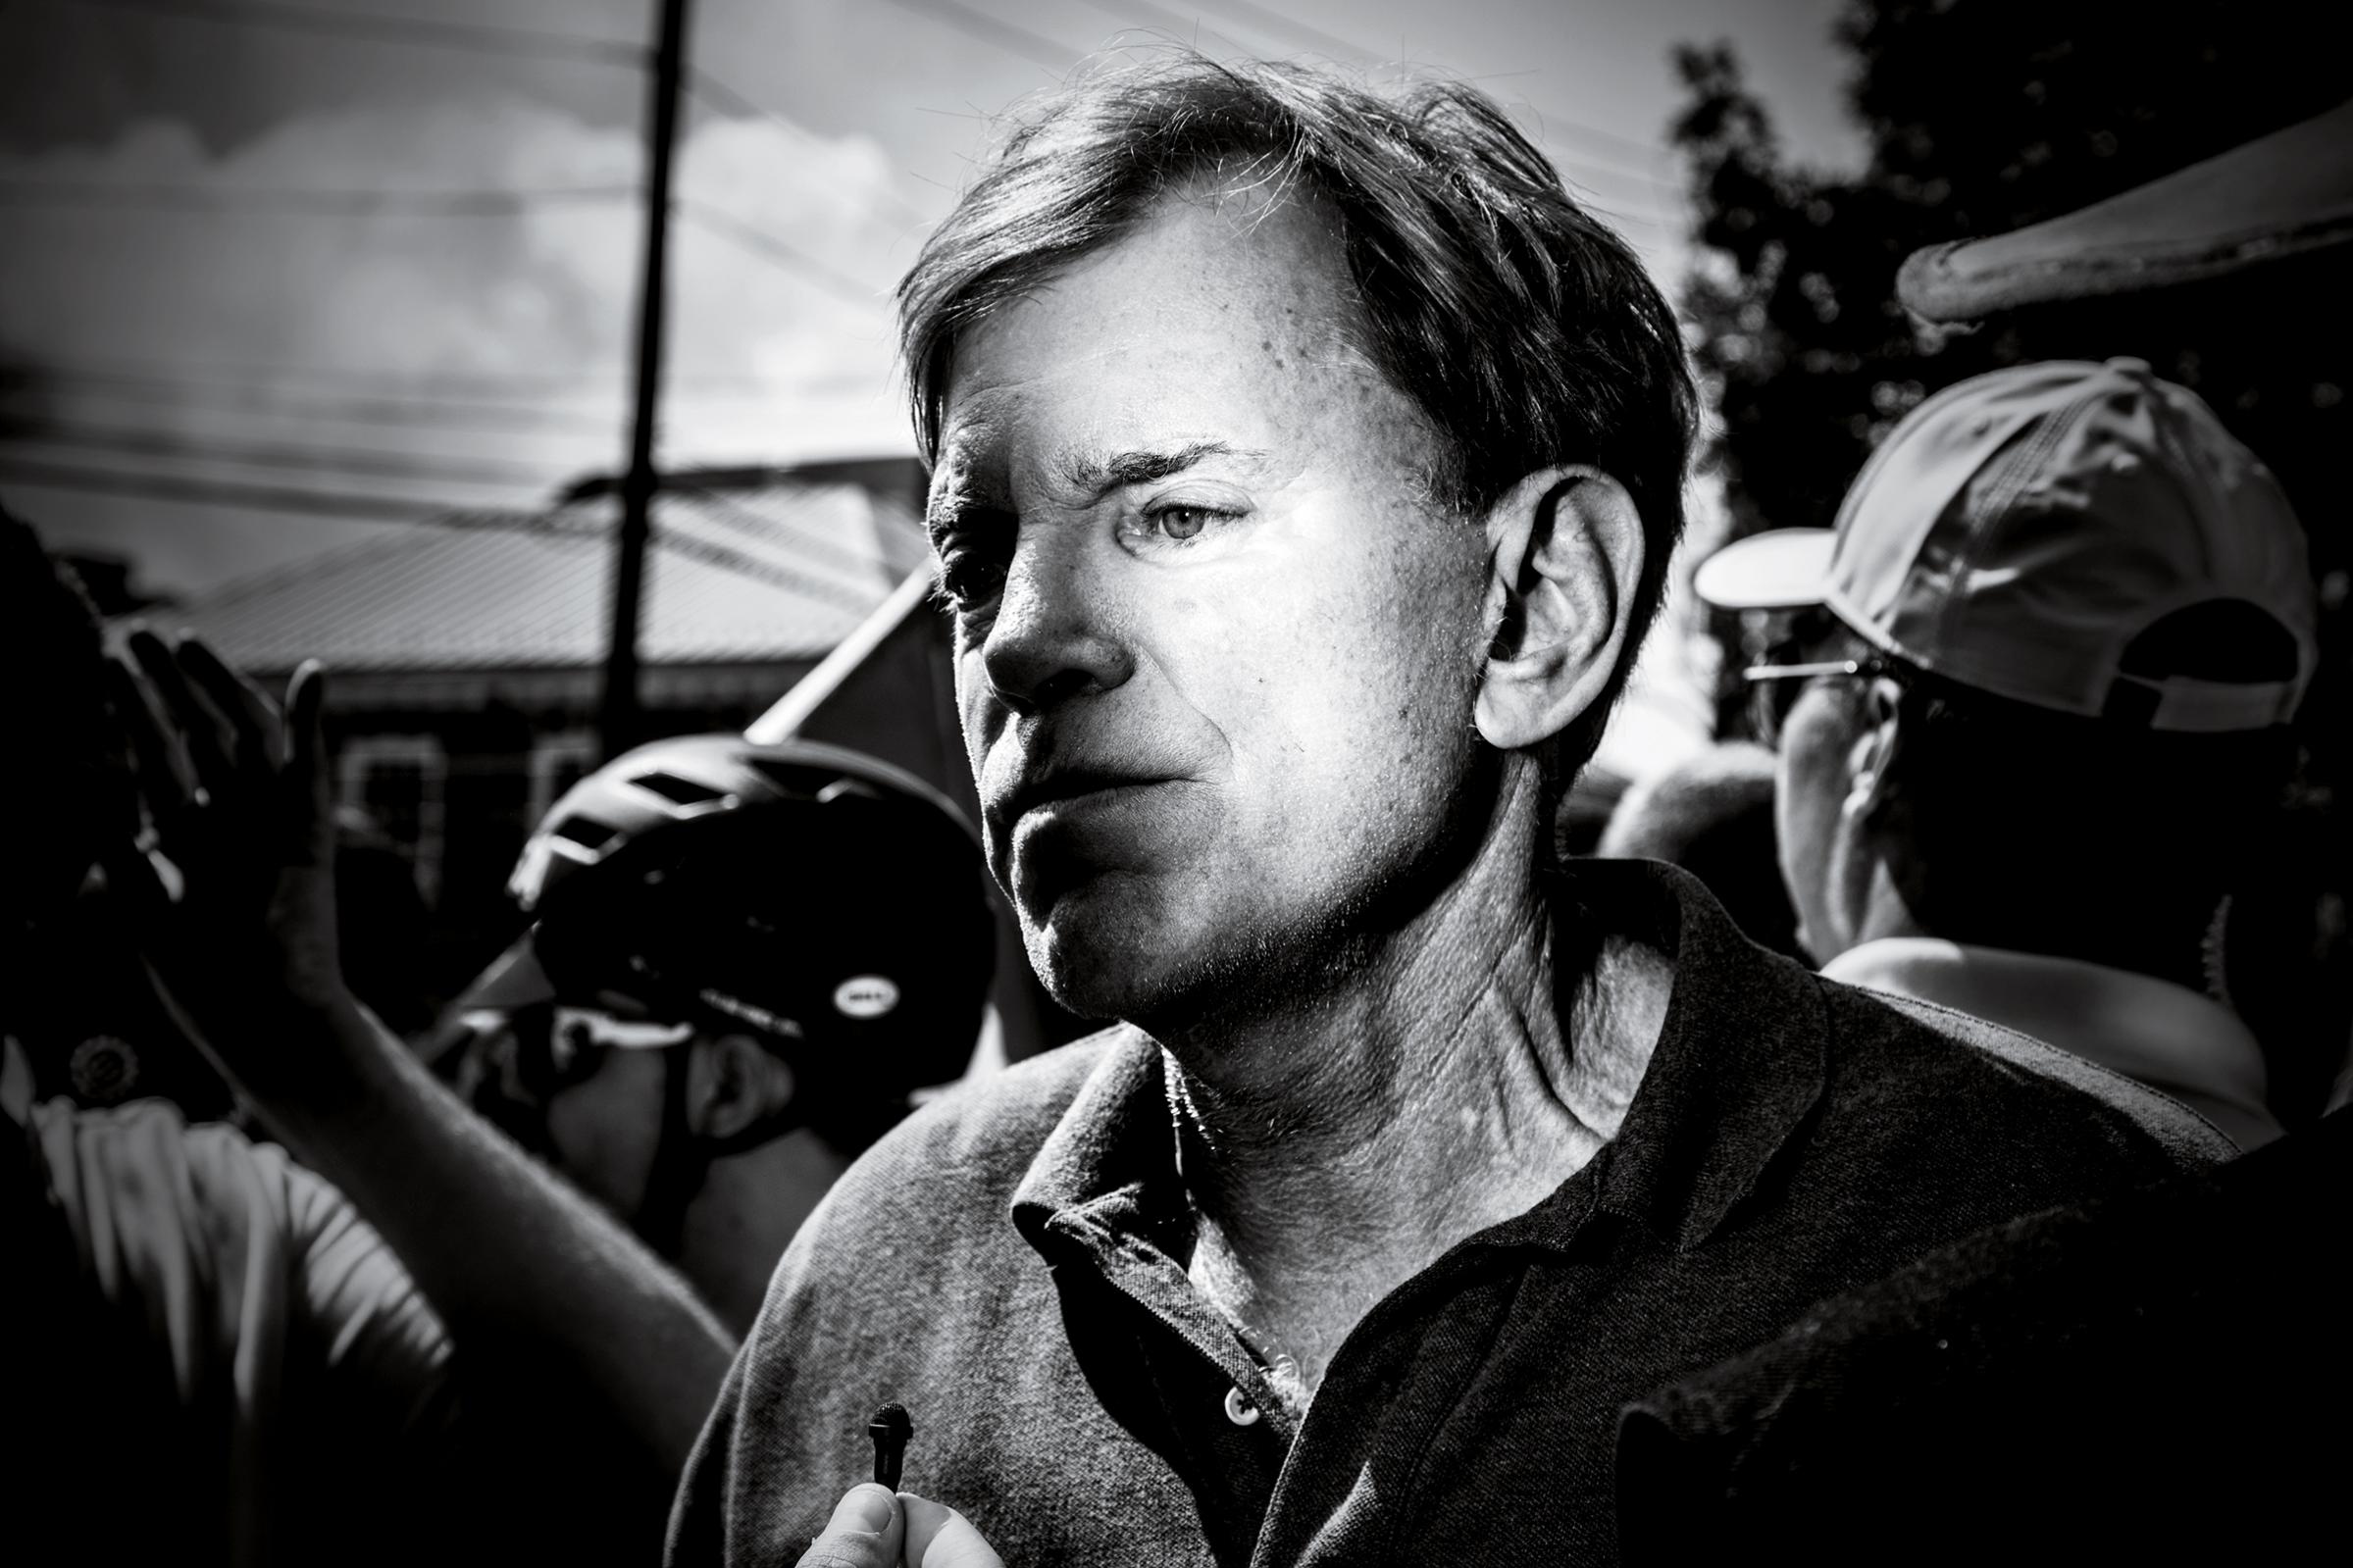 David Duke, the white nationalist and former KKK Grand Wizard, at the Unite the Right rally on Aug. 12